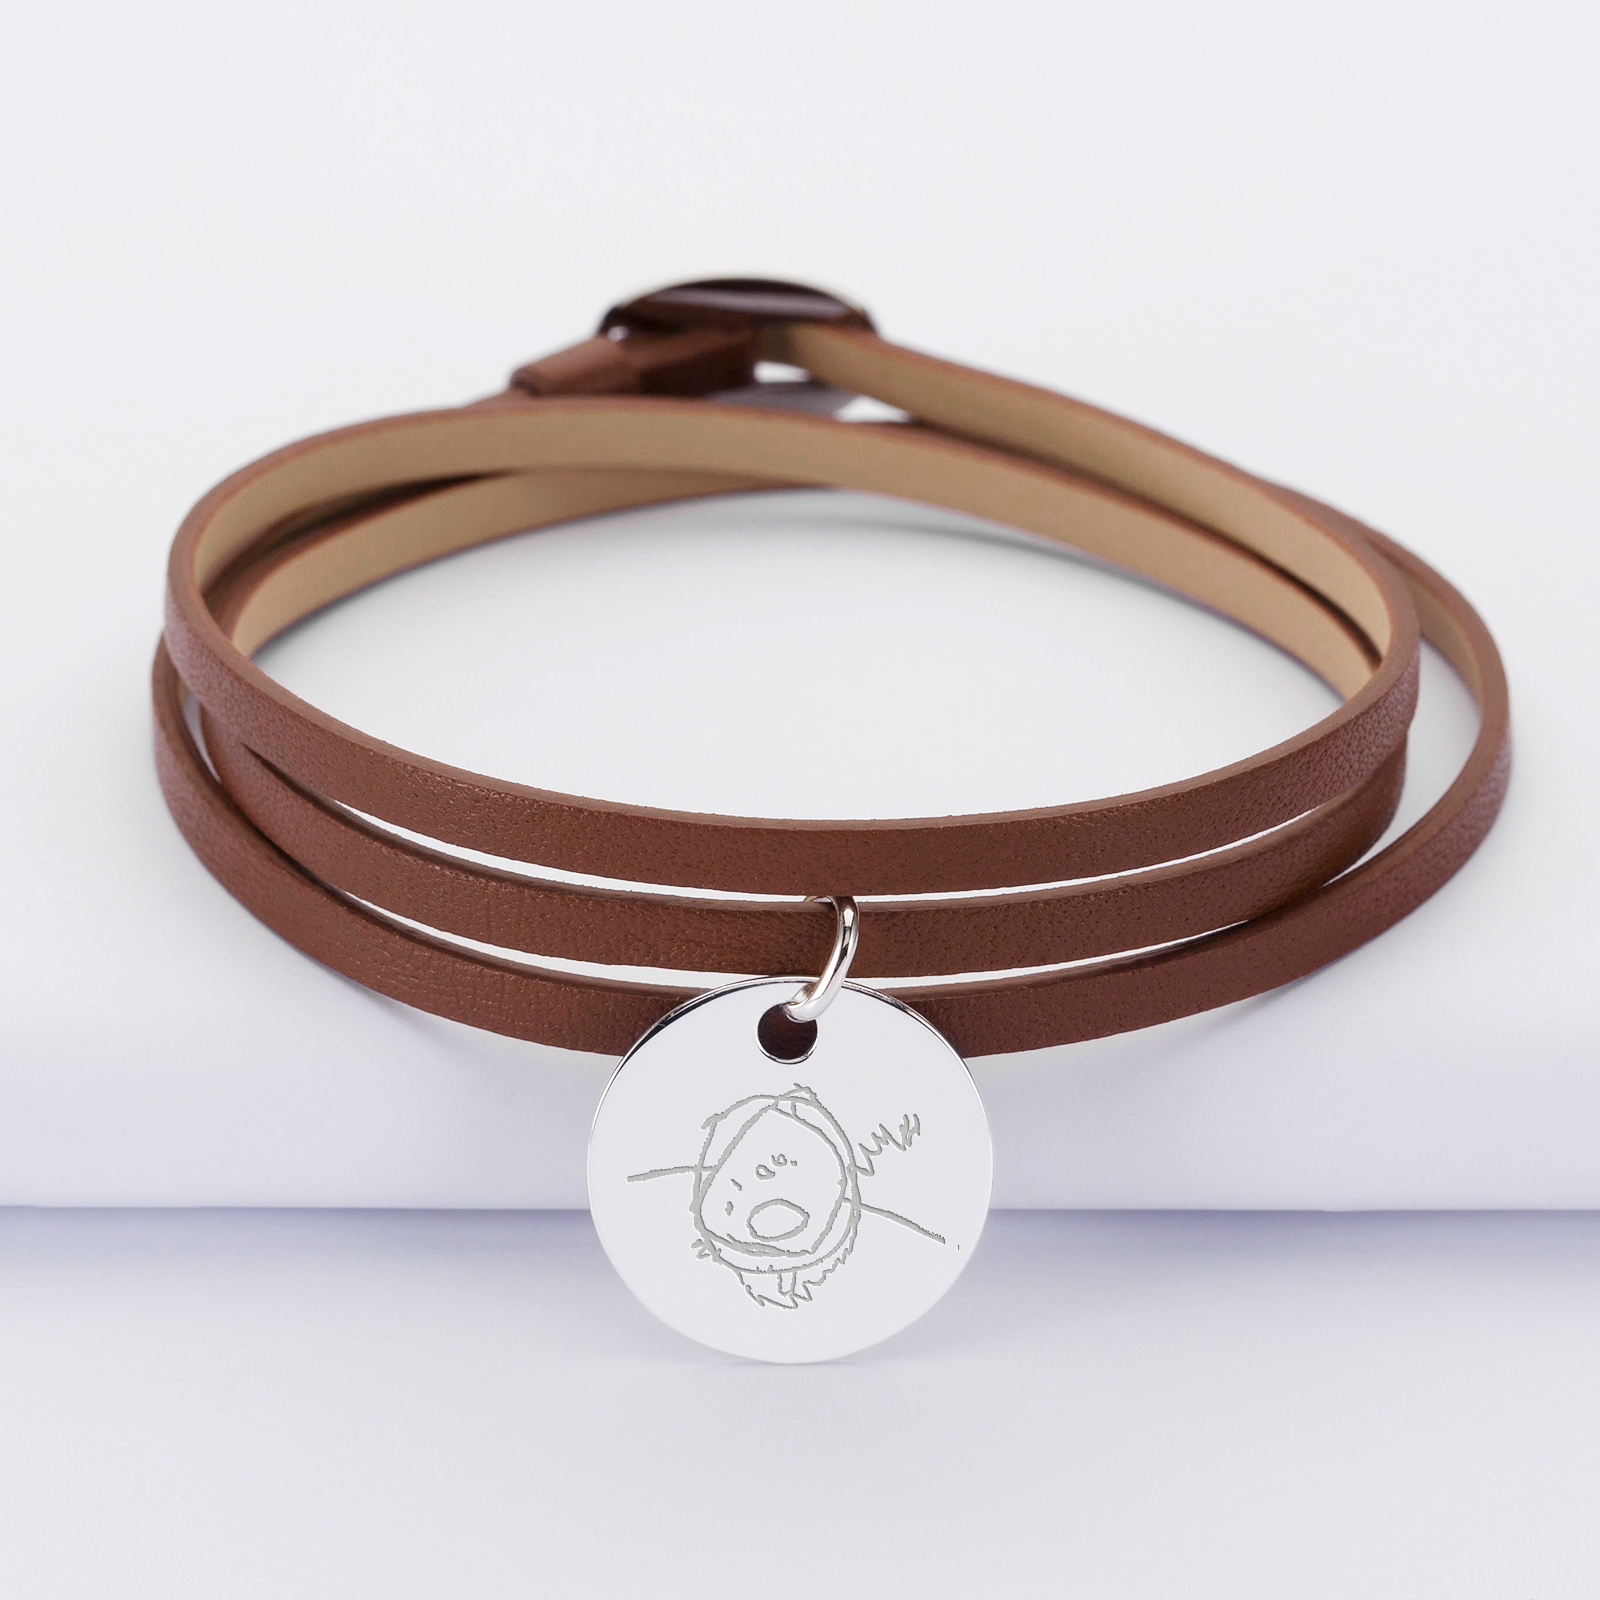 3 turn leather bracelet with personalised engraved silver medallion 19 mm - sketch